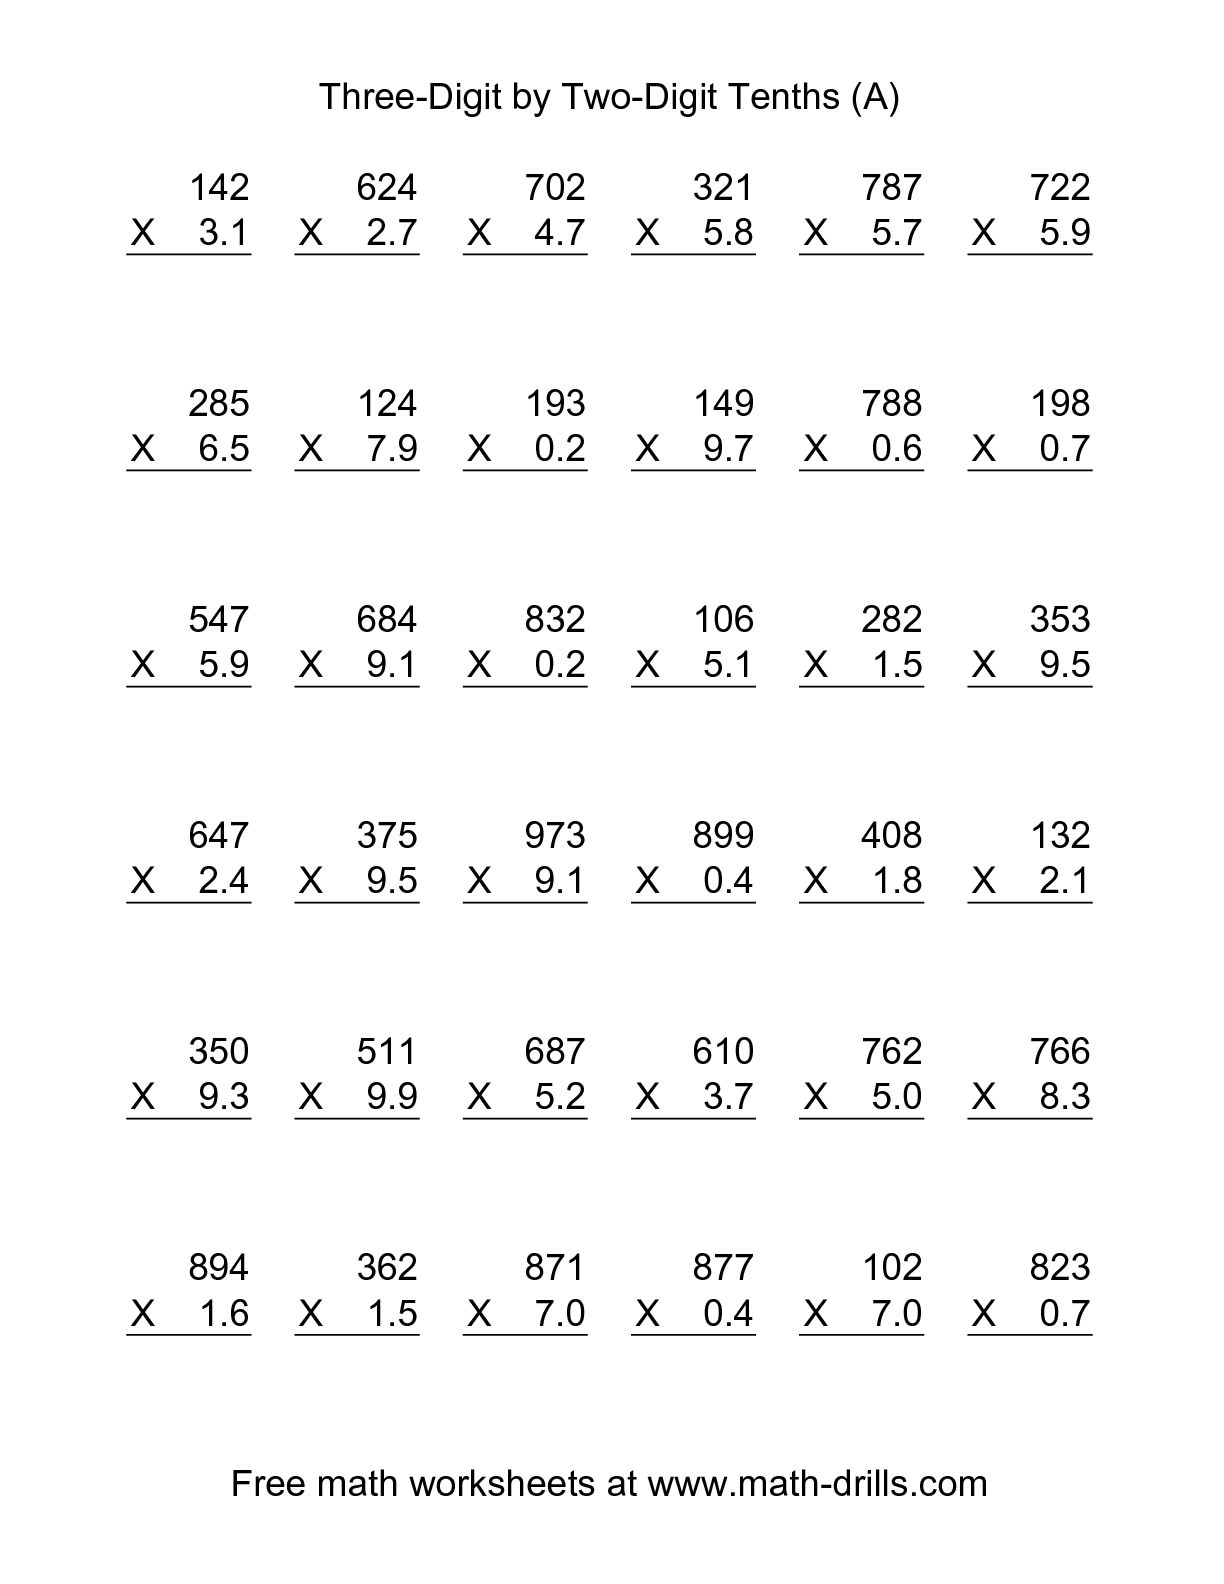 Multiplying Decimals by Whole Numbers Worksheet Image